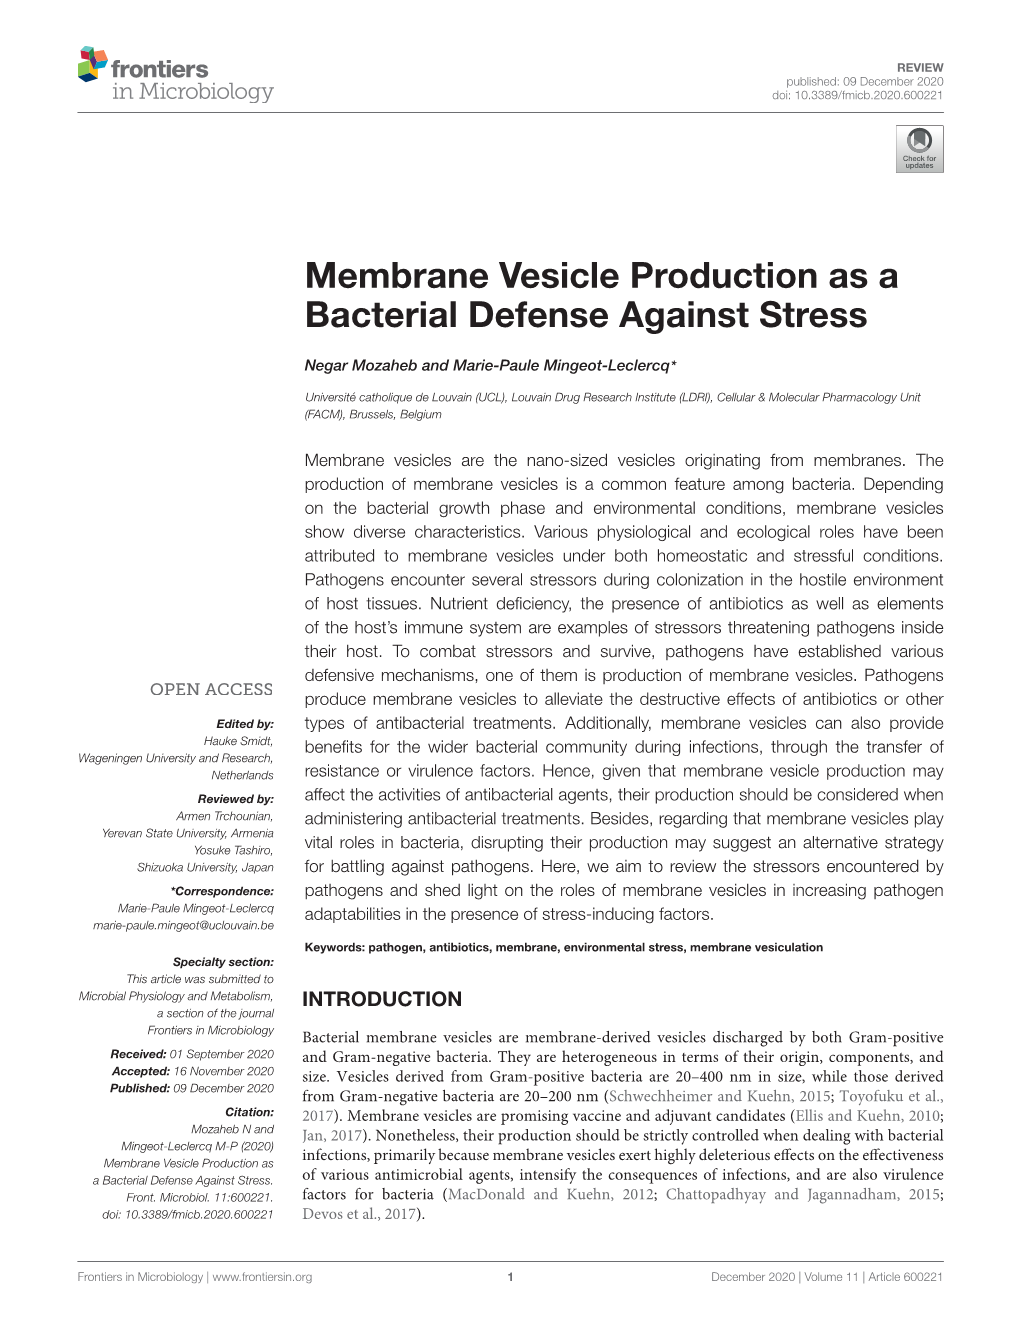 Membrane Vesicle Production As a Bacterial Defense Against Stress